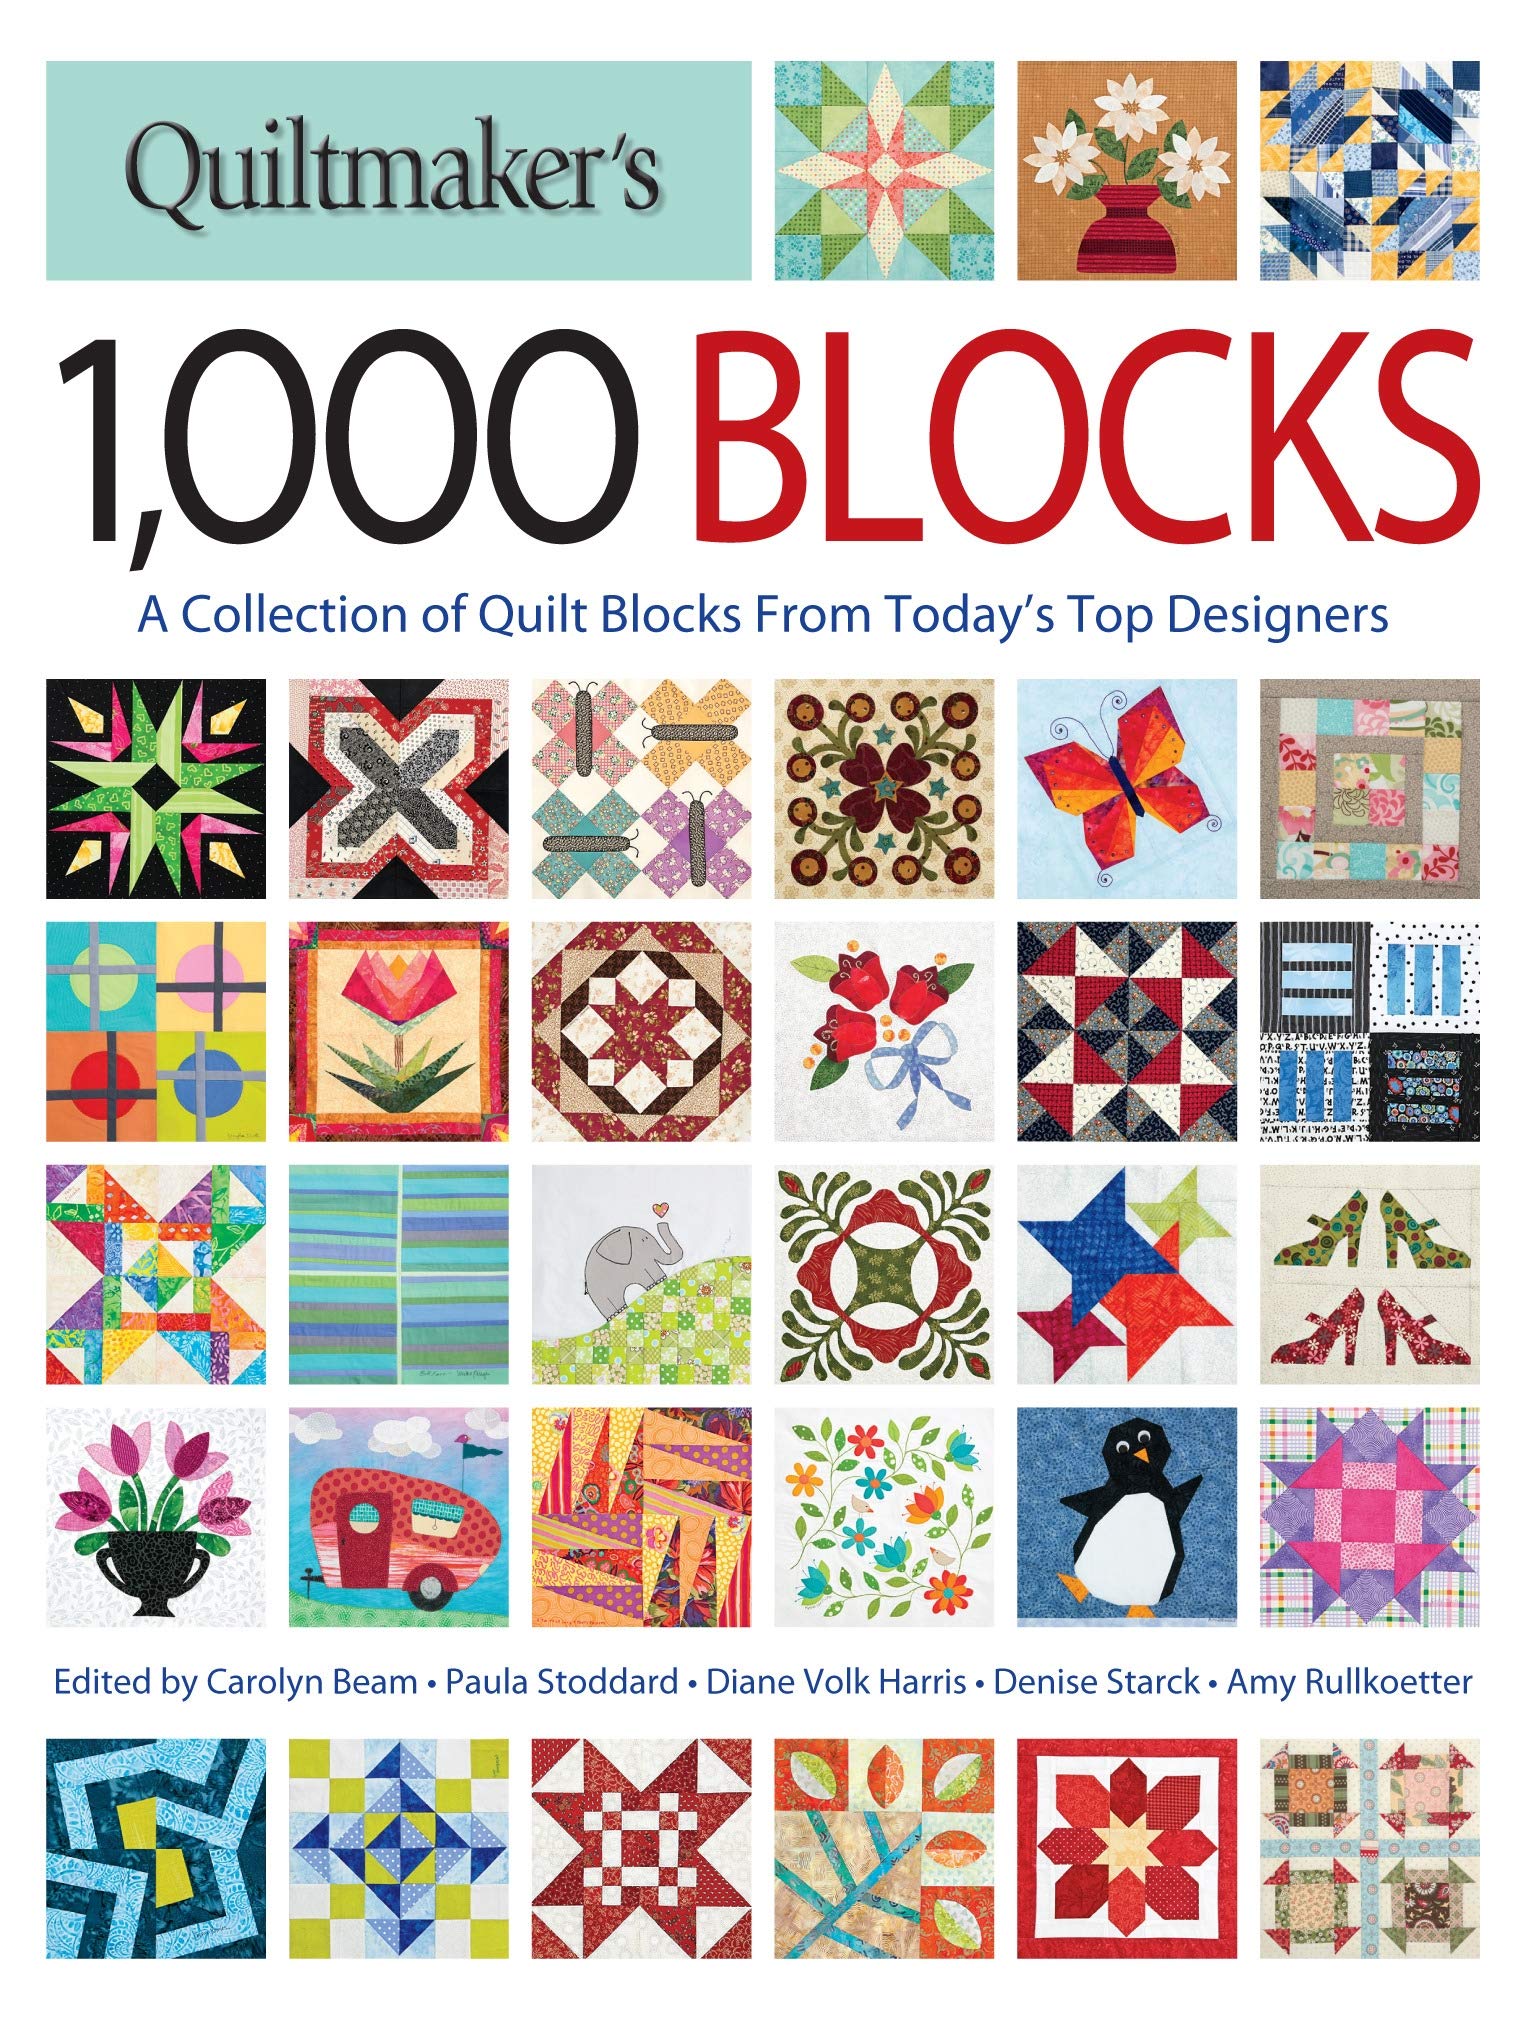 Quiltmaker's 1,000 Blocks: A Collection of Quilt Blocks from Today's Top Designers